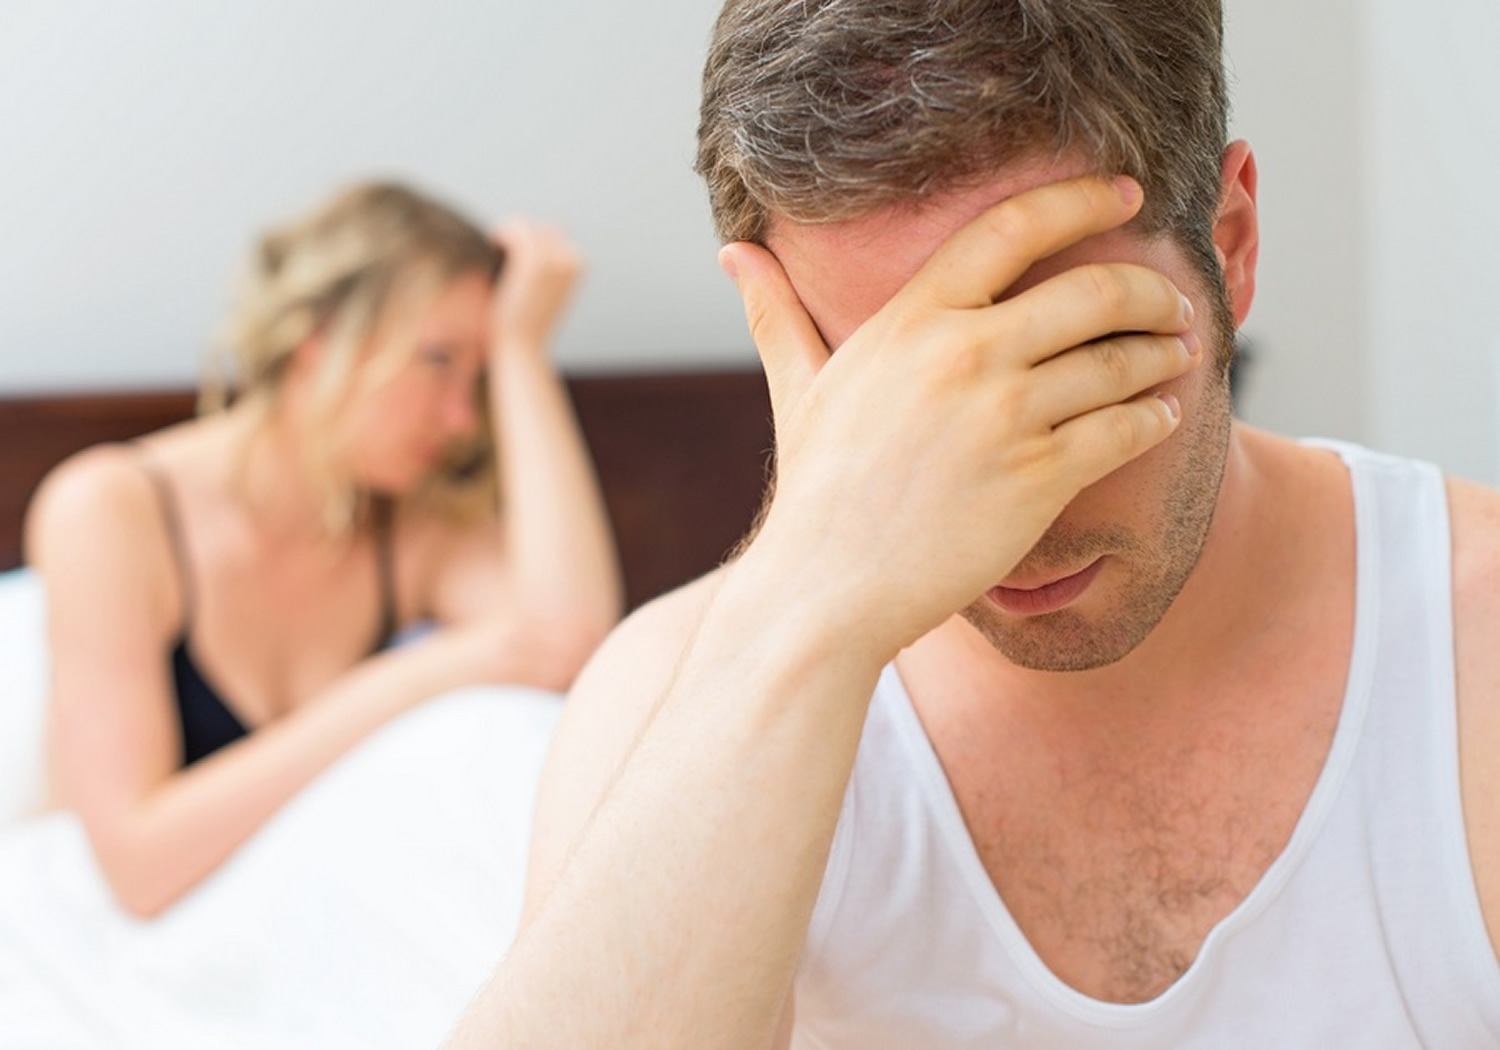 How to Deal with Erectile Dysfunction?